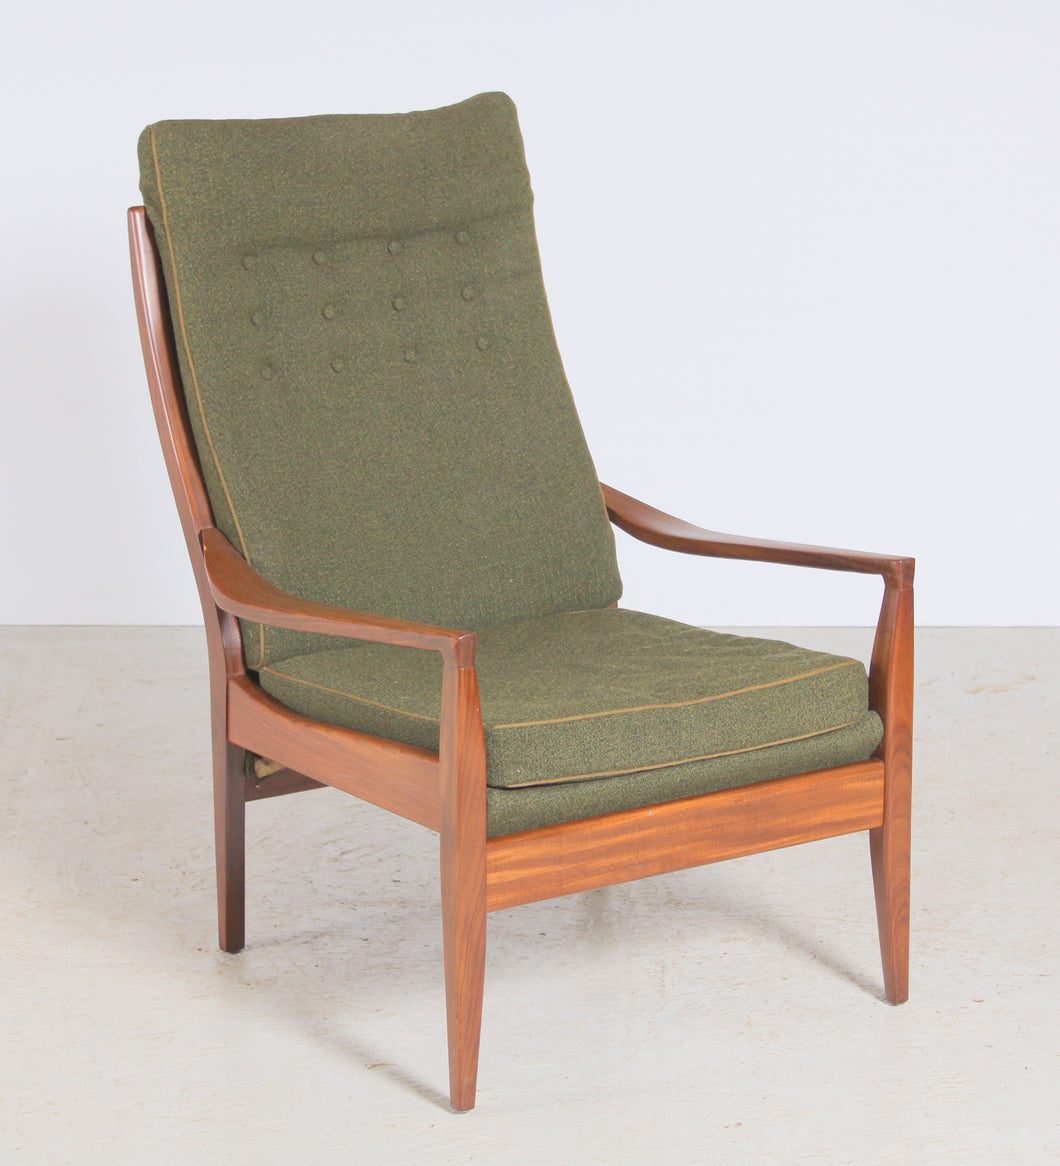 Mid Century Cintique Afrormosia Armchair with Original Green Fabric Upholstery.